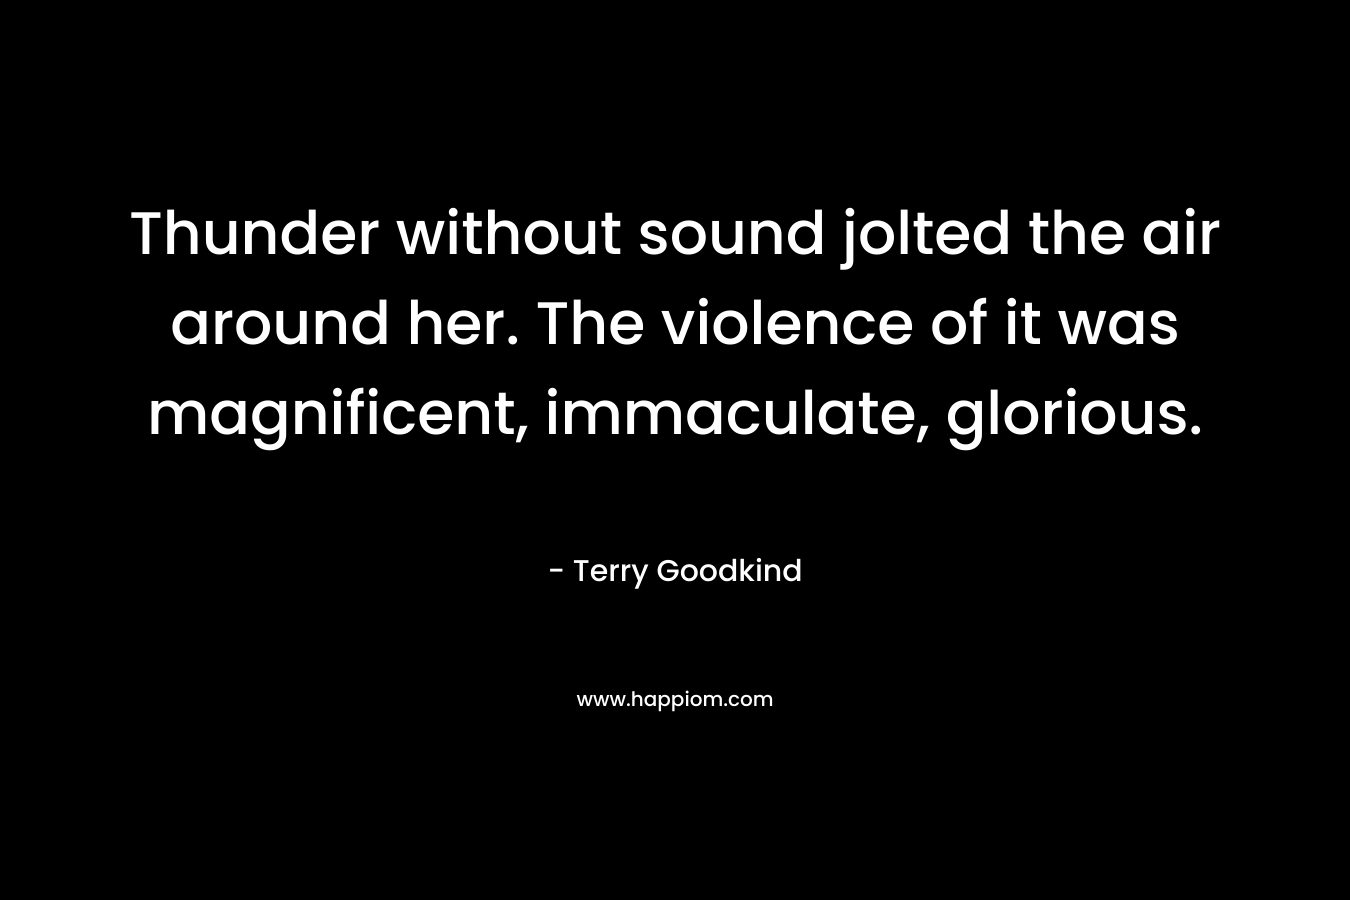 Thunder without sound jolted the air around her. The violence of it was magnificent, immaculate, glorious.